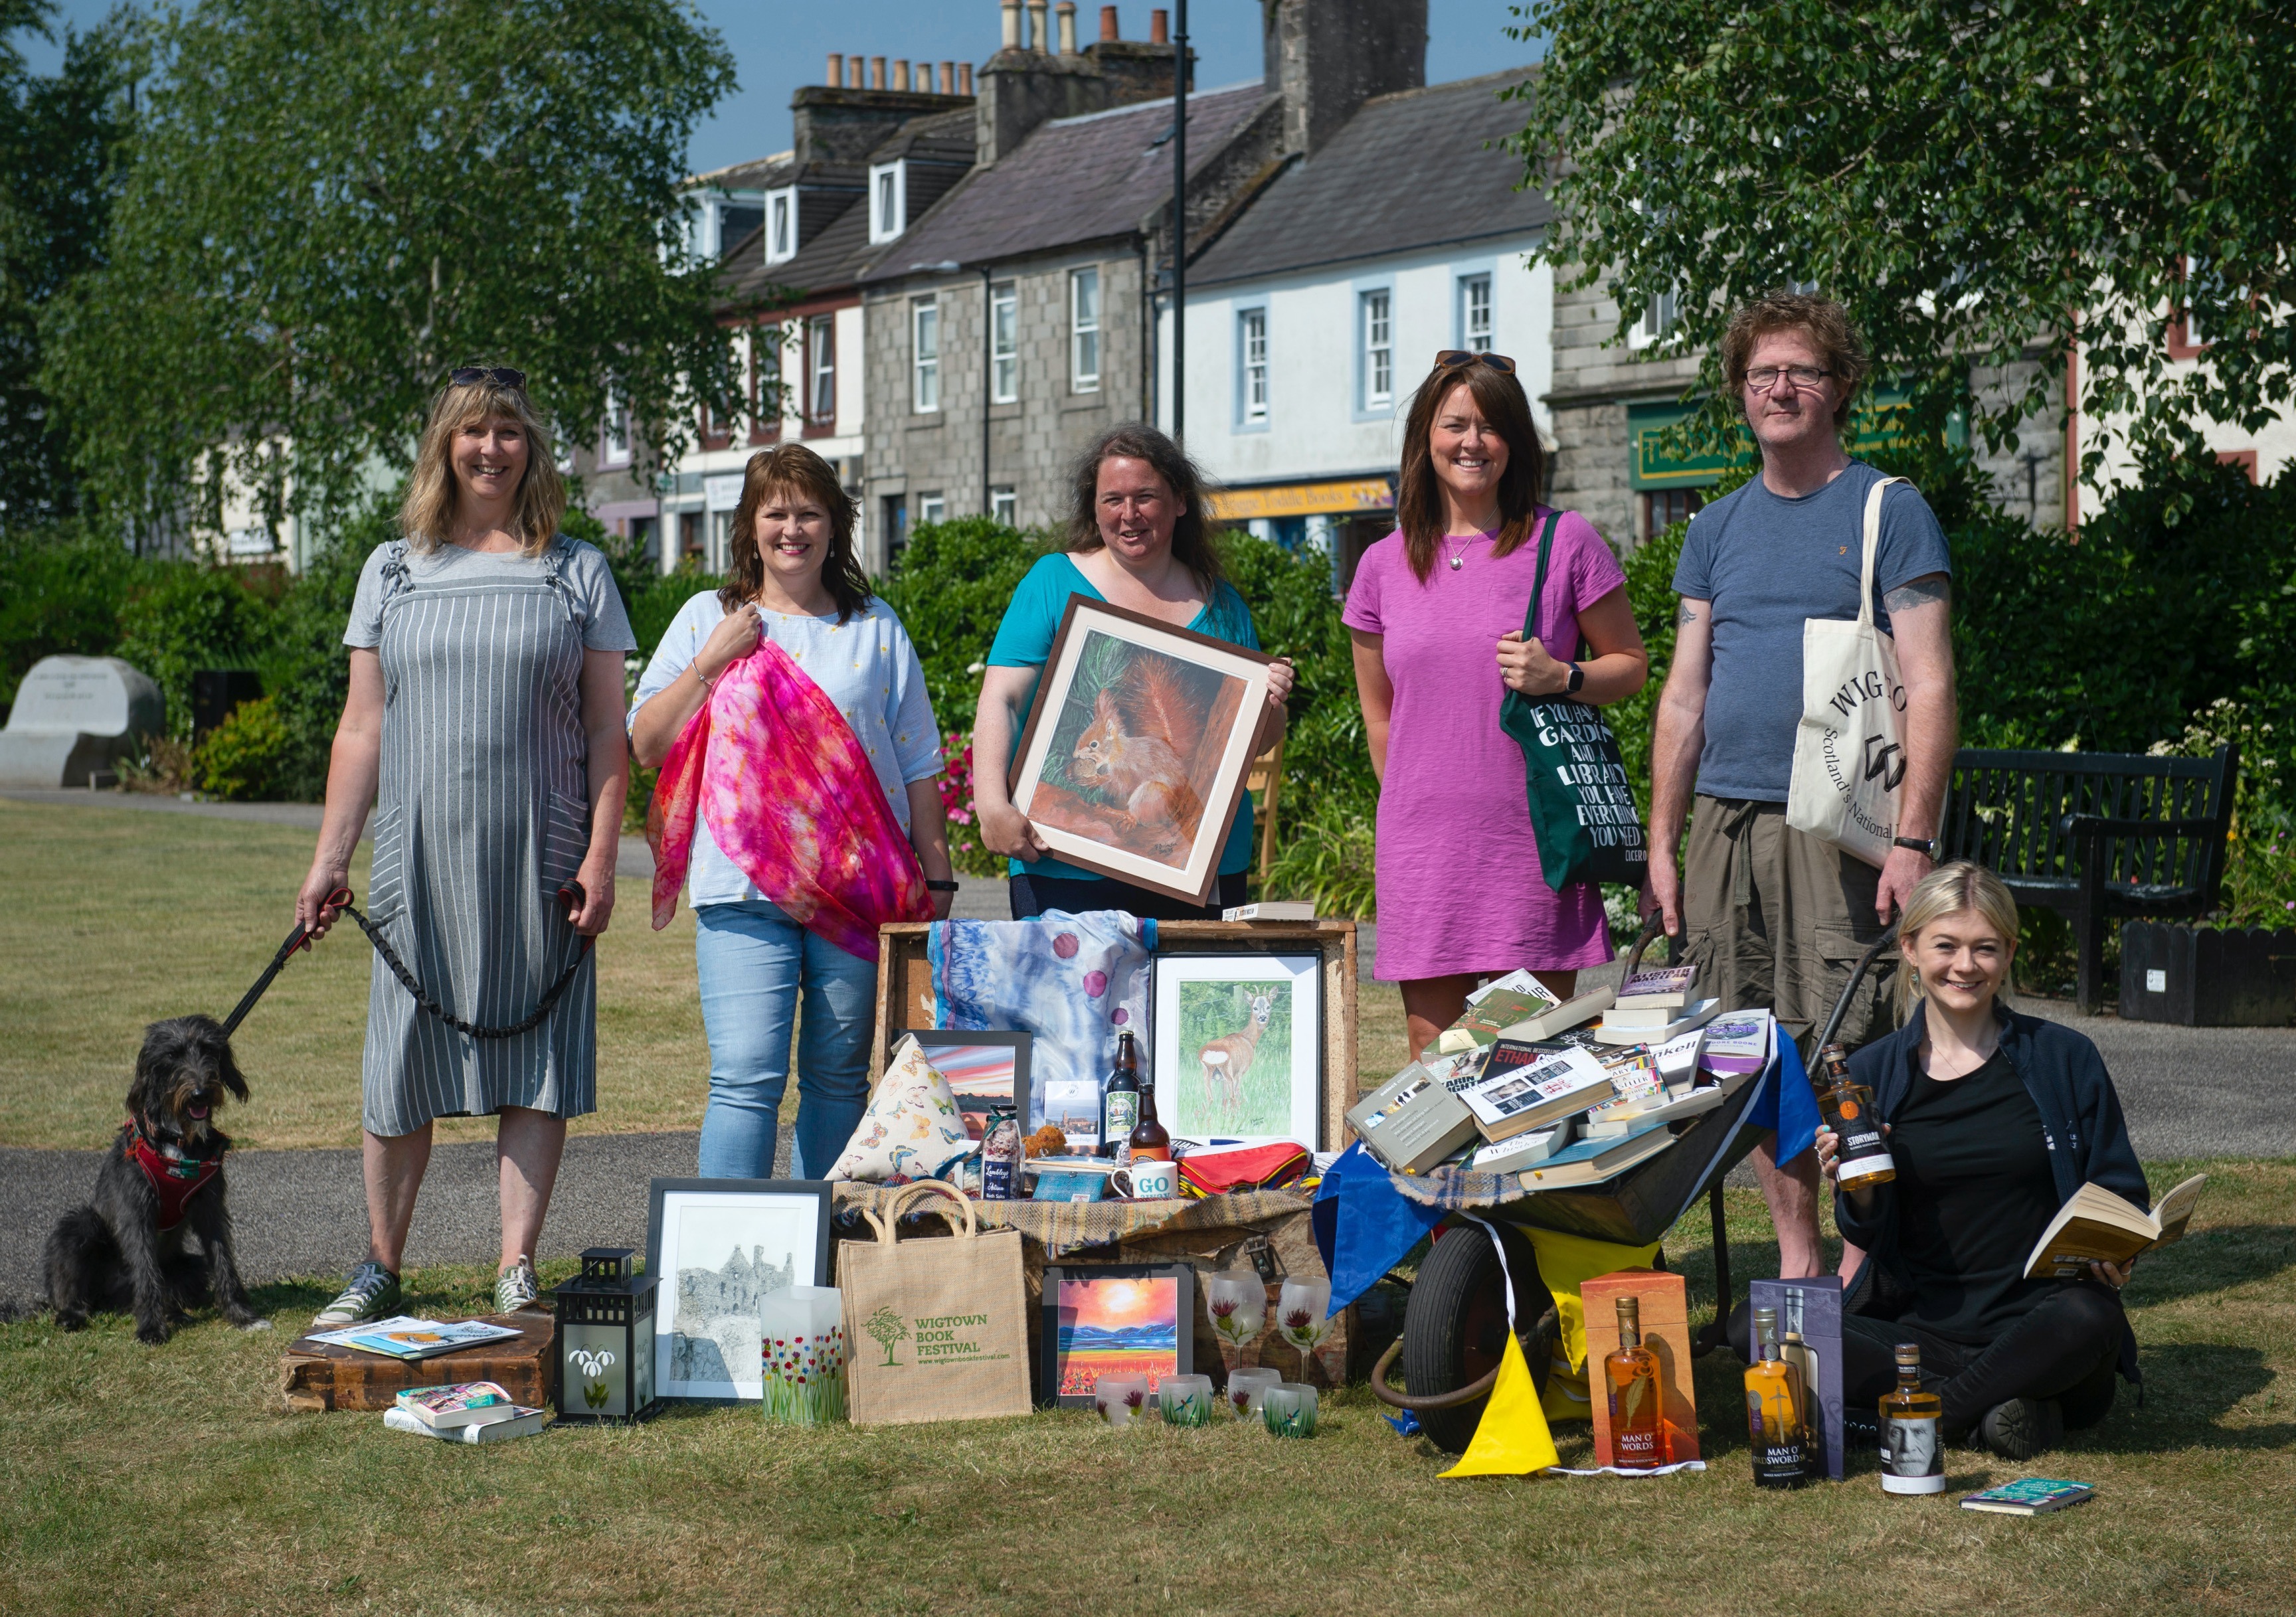 Wigtown Bookshop owners Shaun Bythell and Jane Baldwin stand in Wigtown gardens with stall holders from The Kist. They are holding various books and pictures during the Wigtown Book Festival.